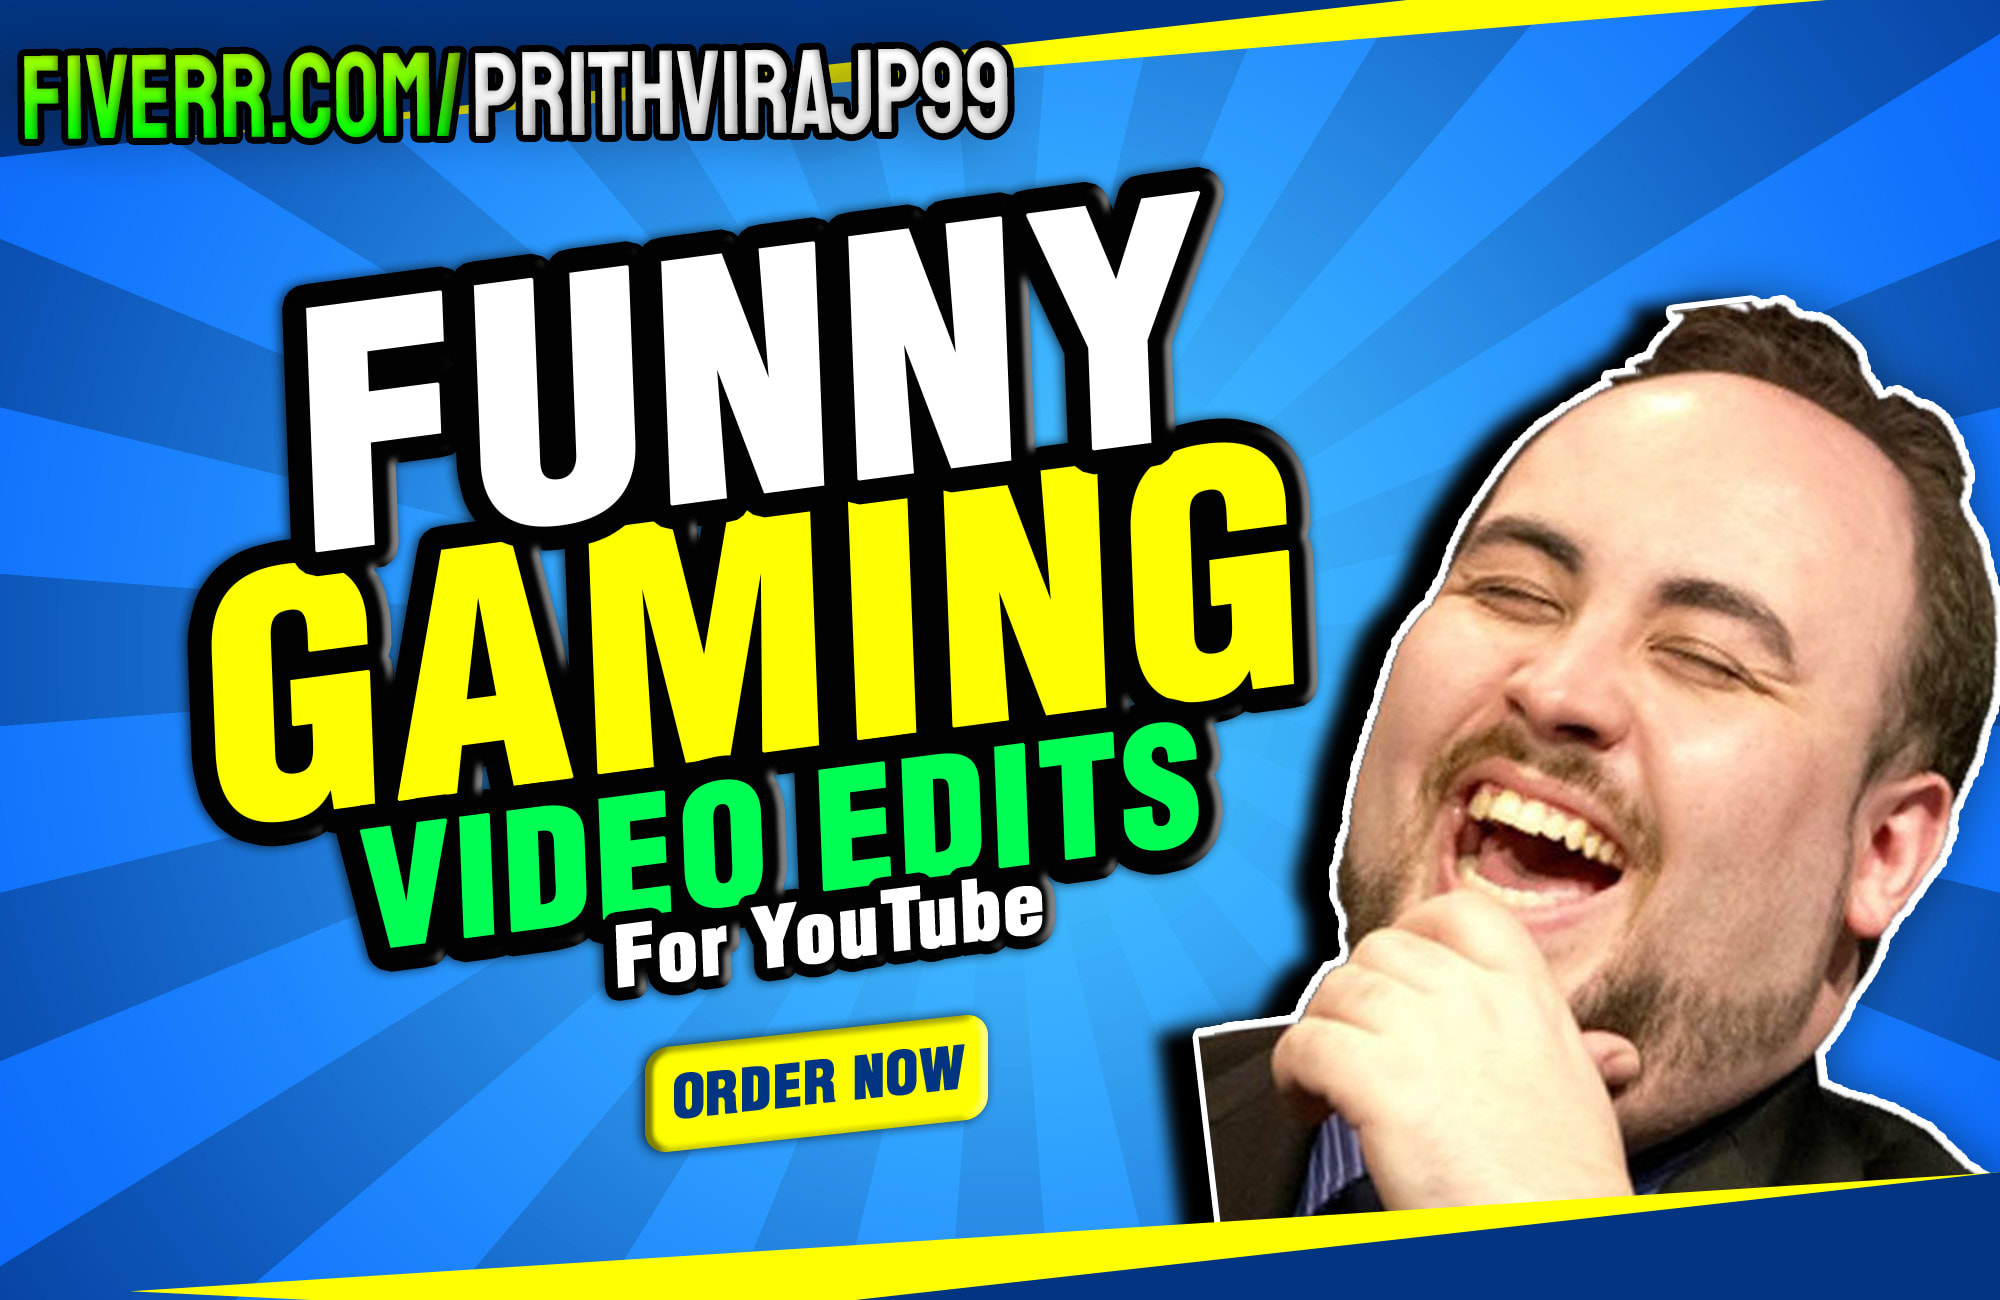 Do a funny gaming video edit for youtube by Prithvirajp99 | Fiverr